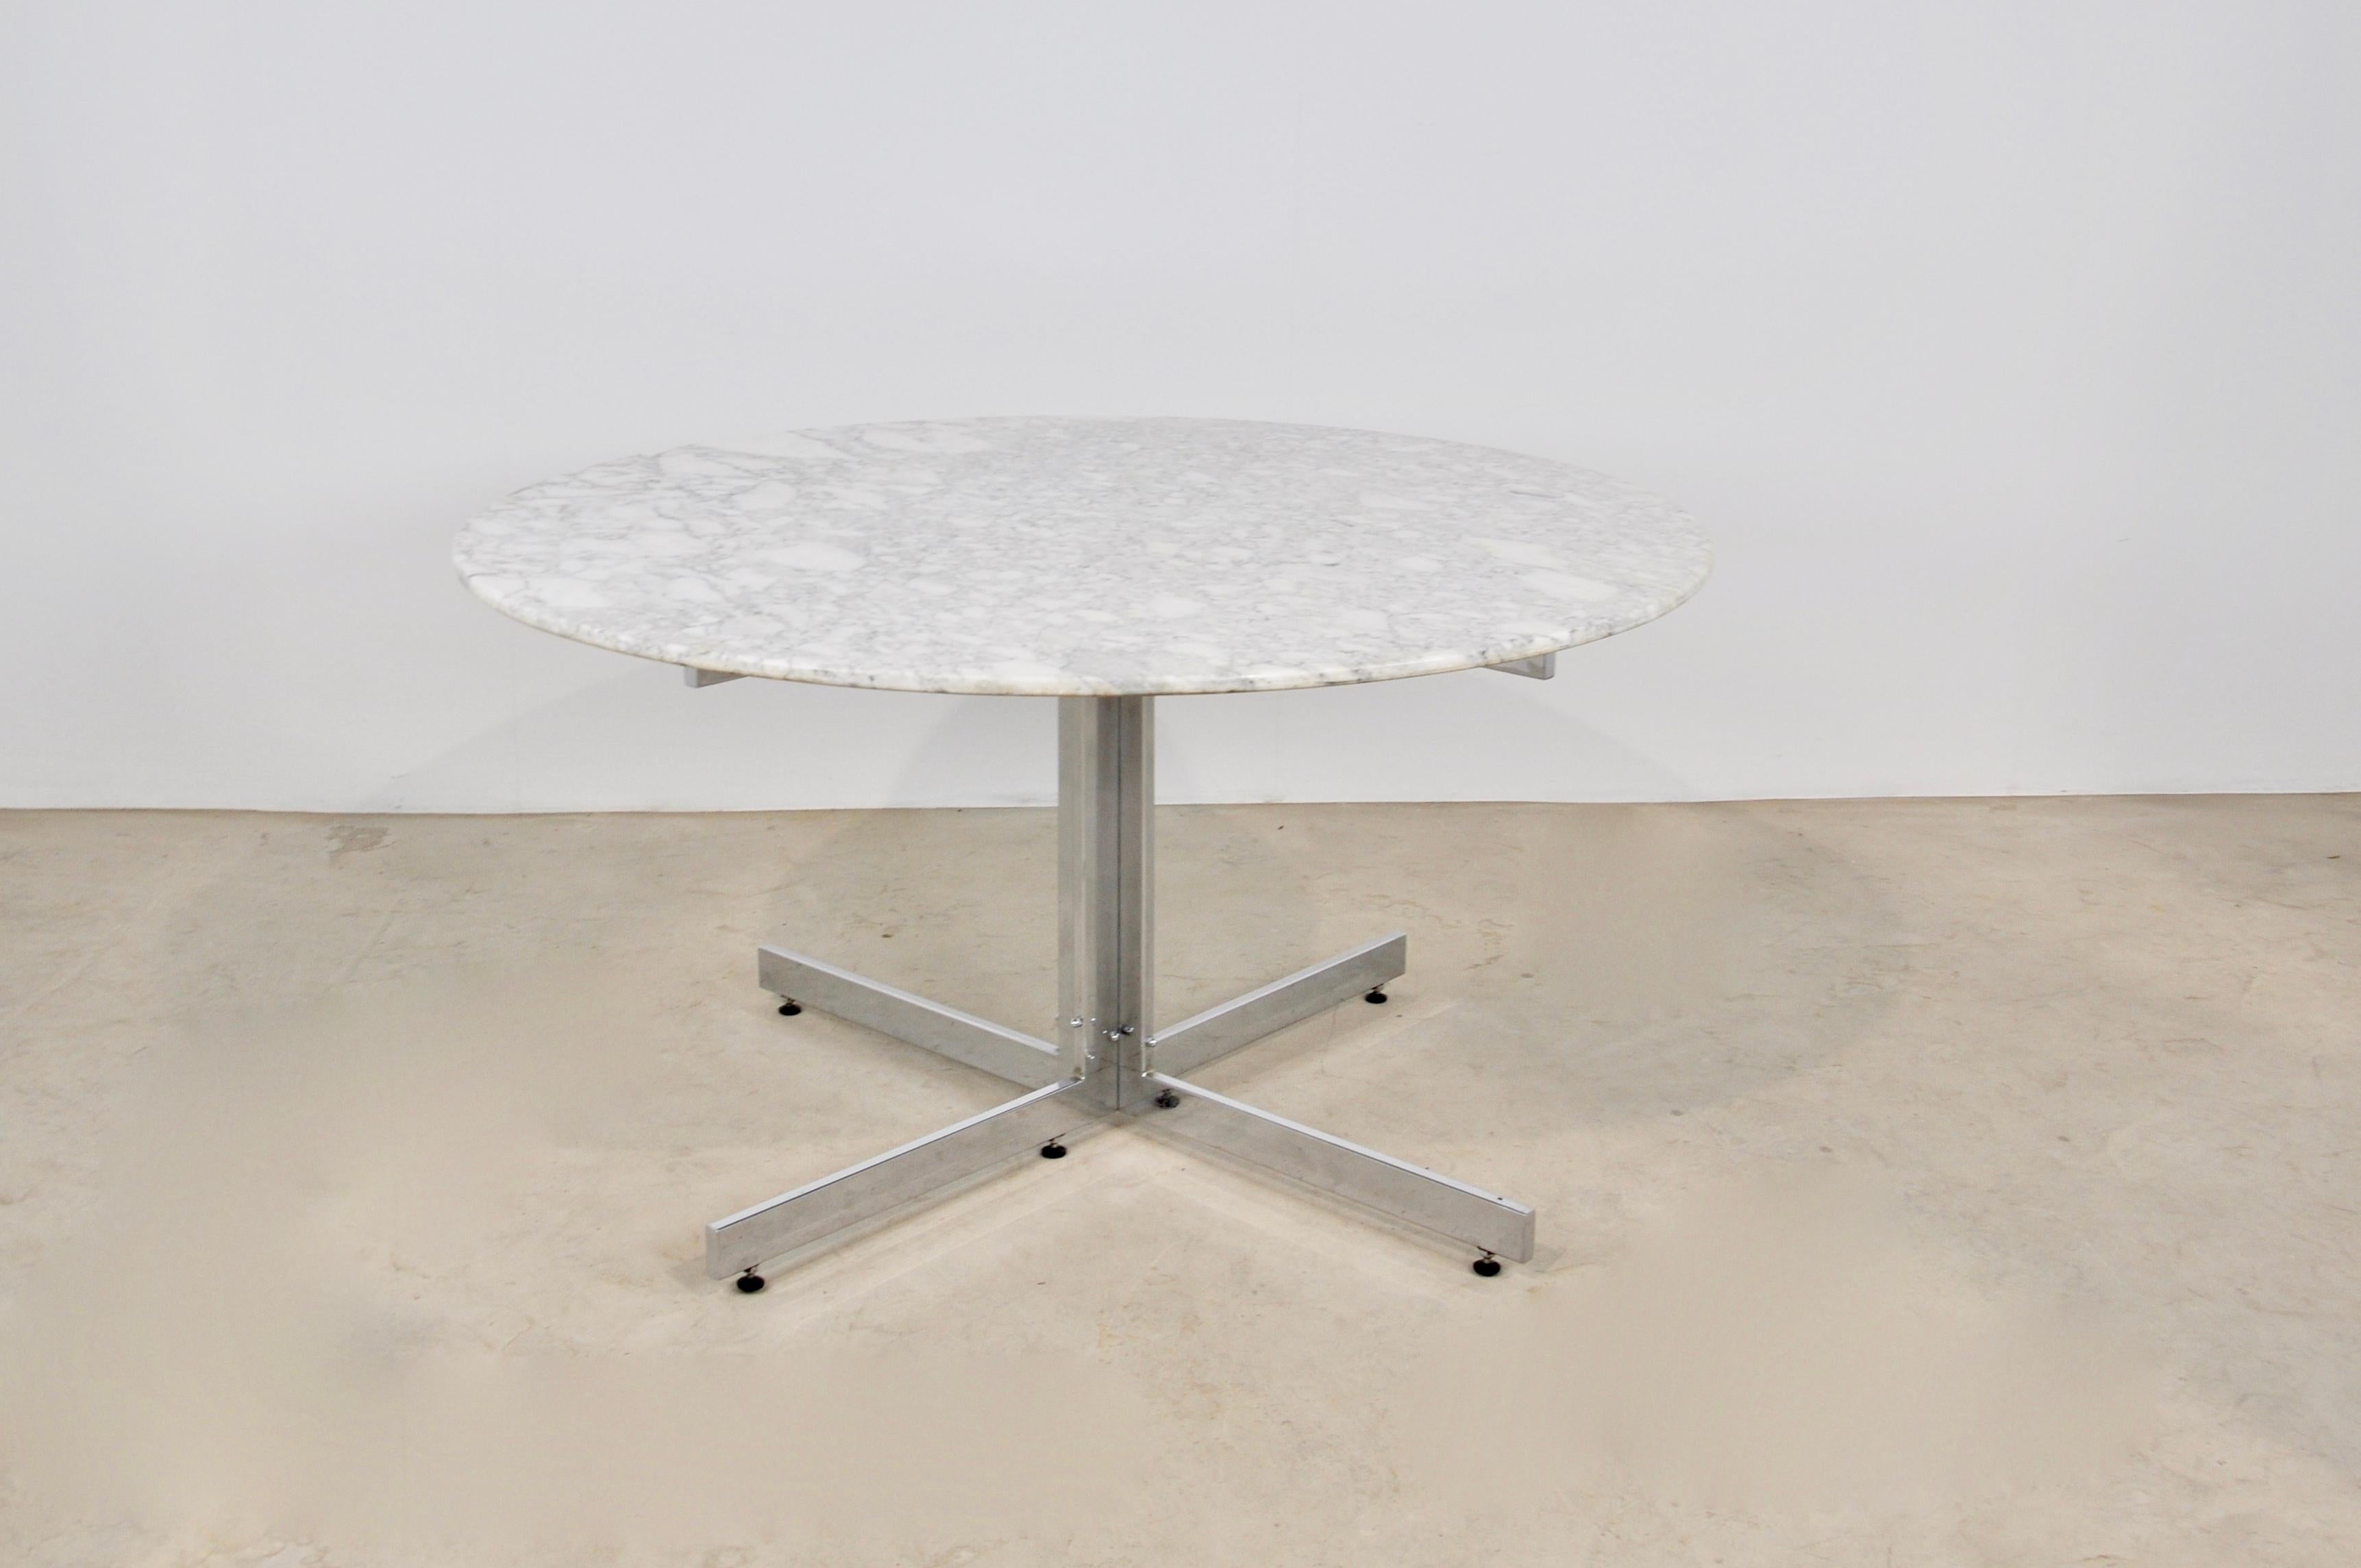 Carrara marble table, chromed metal base. Wear due to time and age of the table.